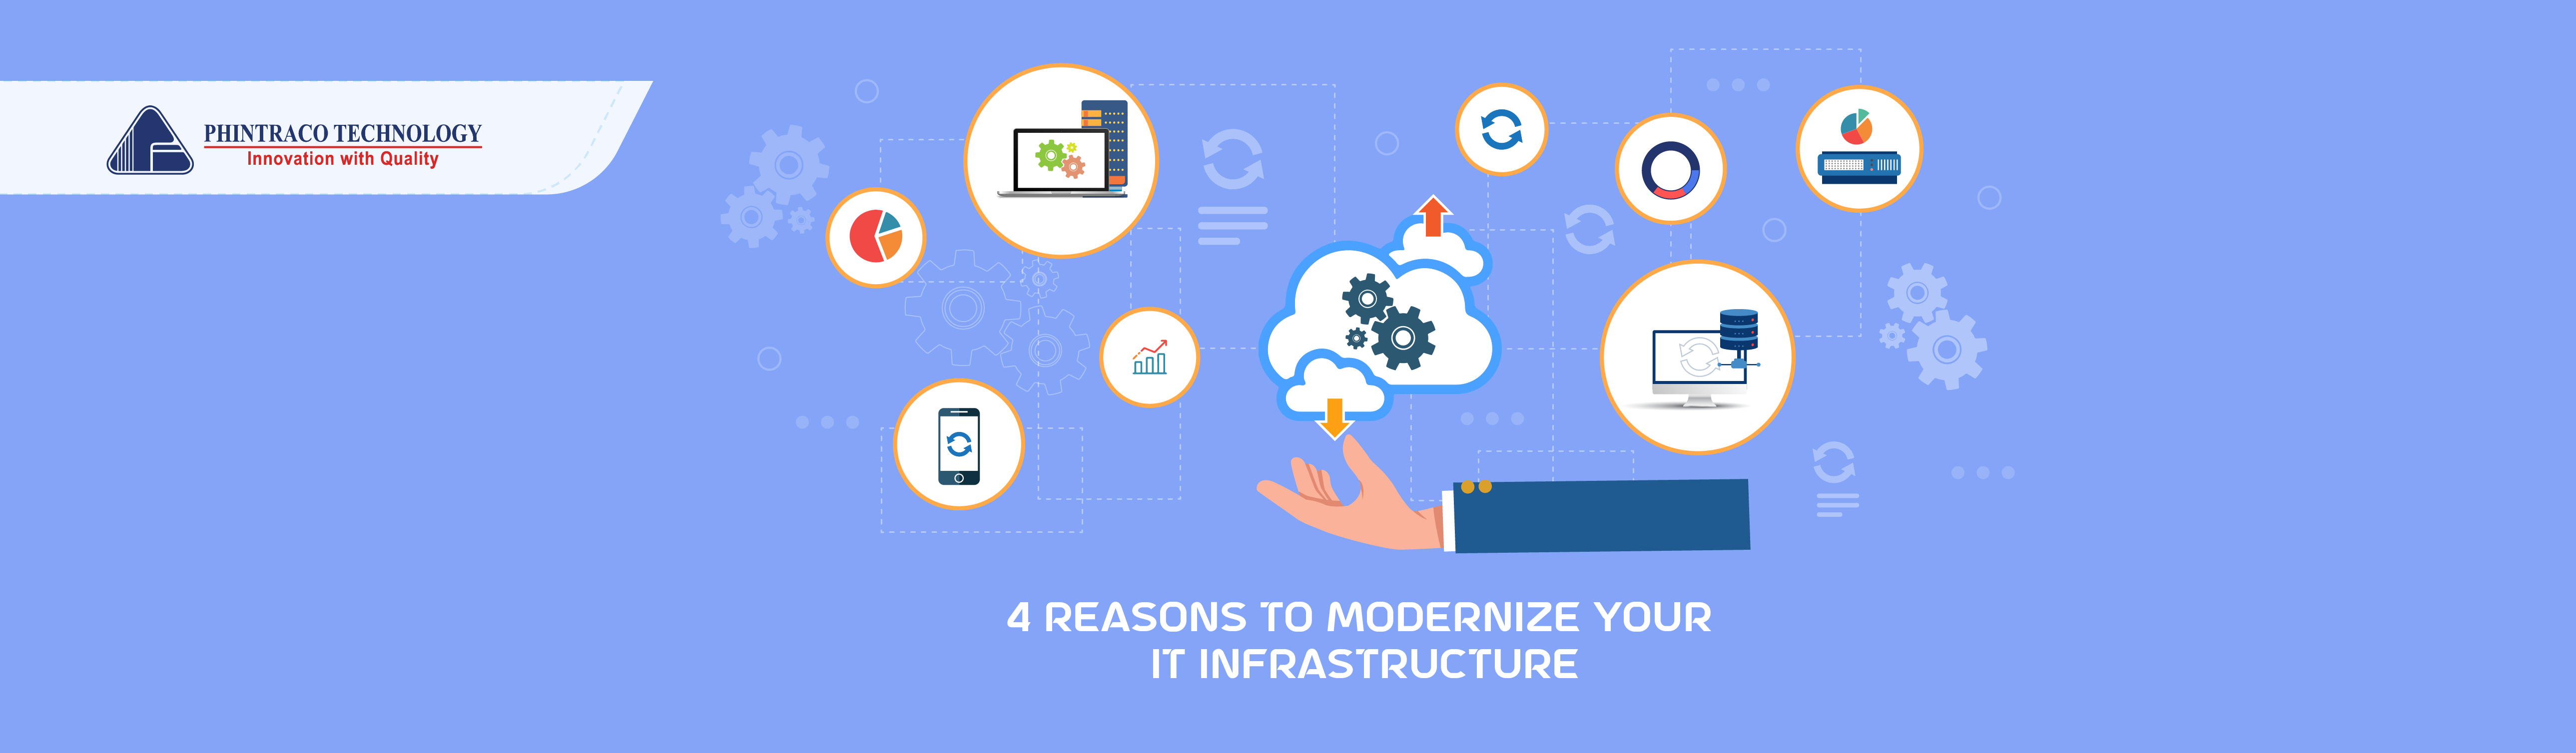 4 Reasons to Modernize IT Infrastructure